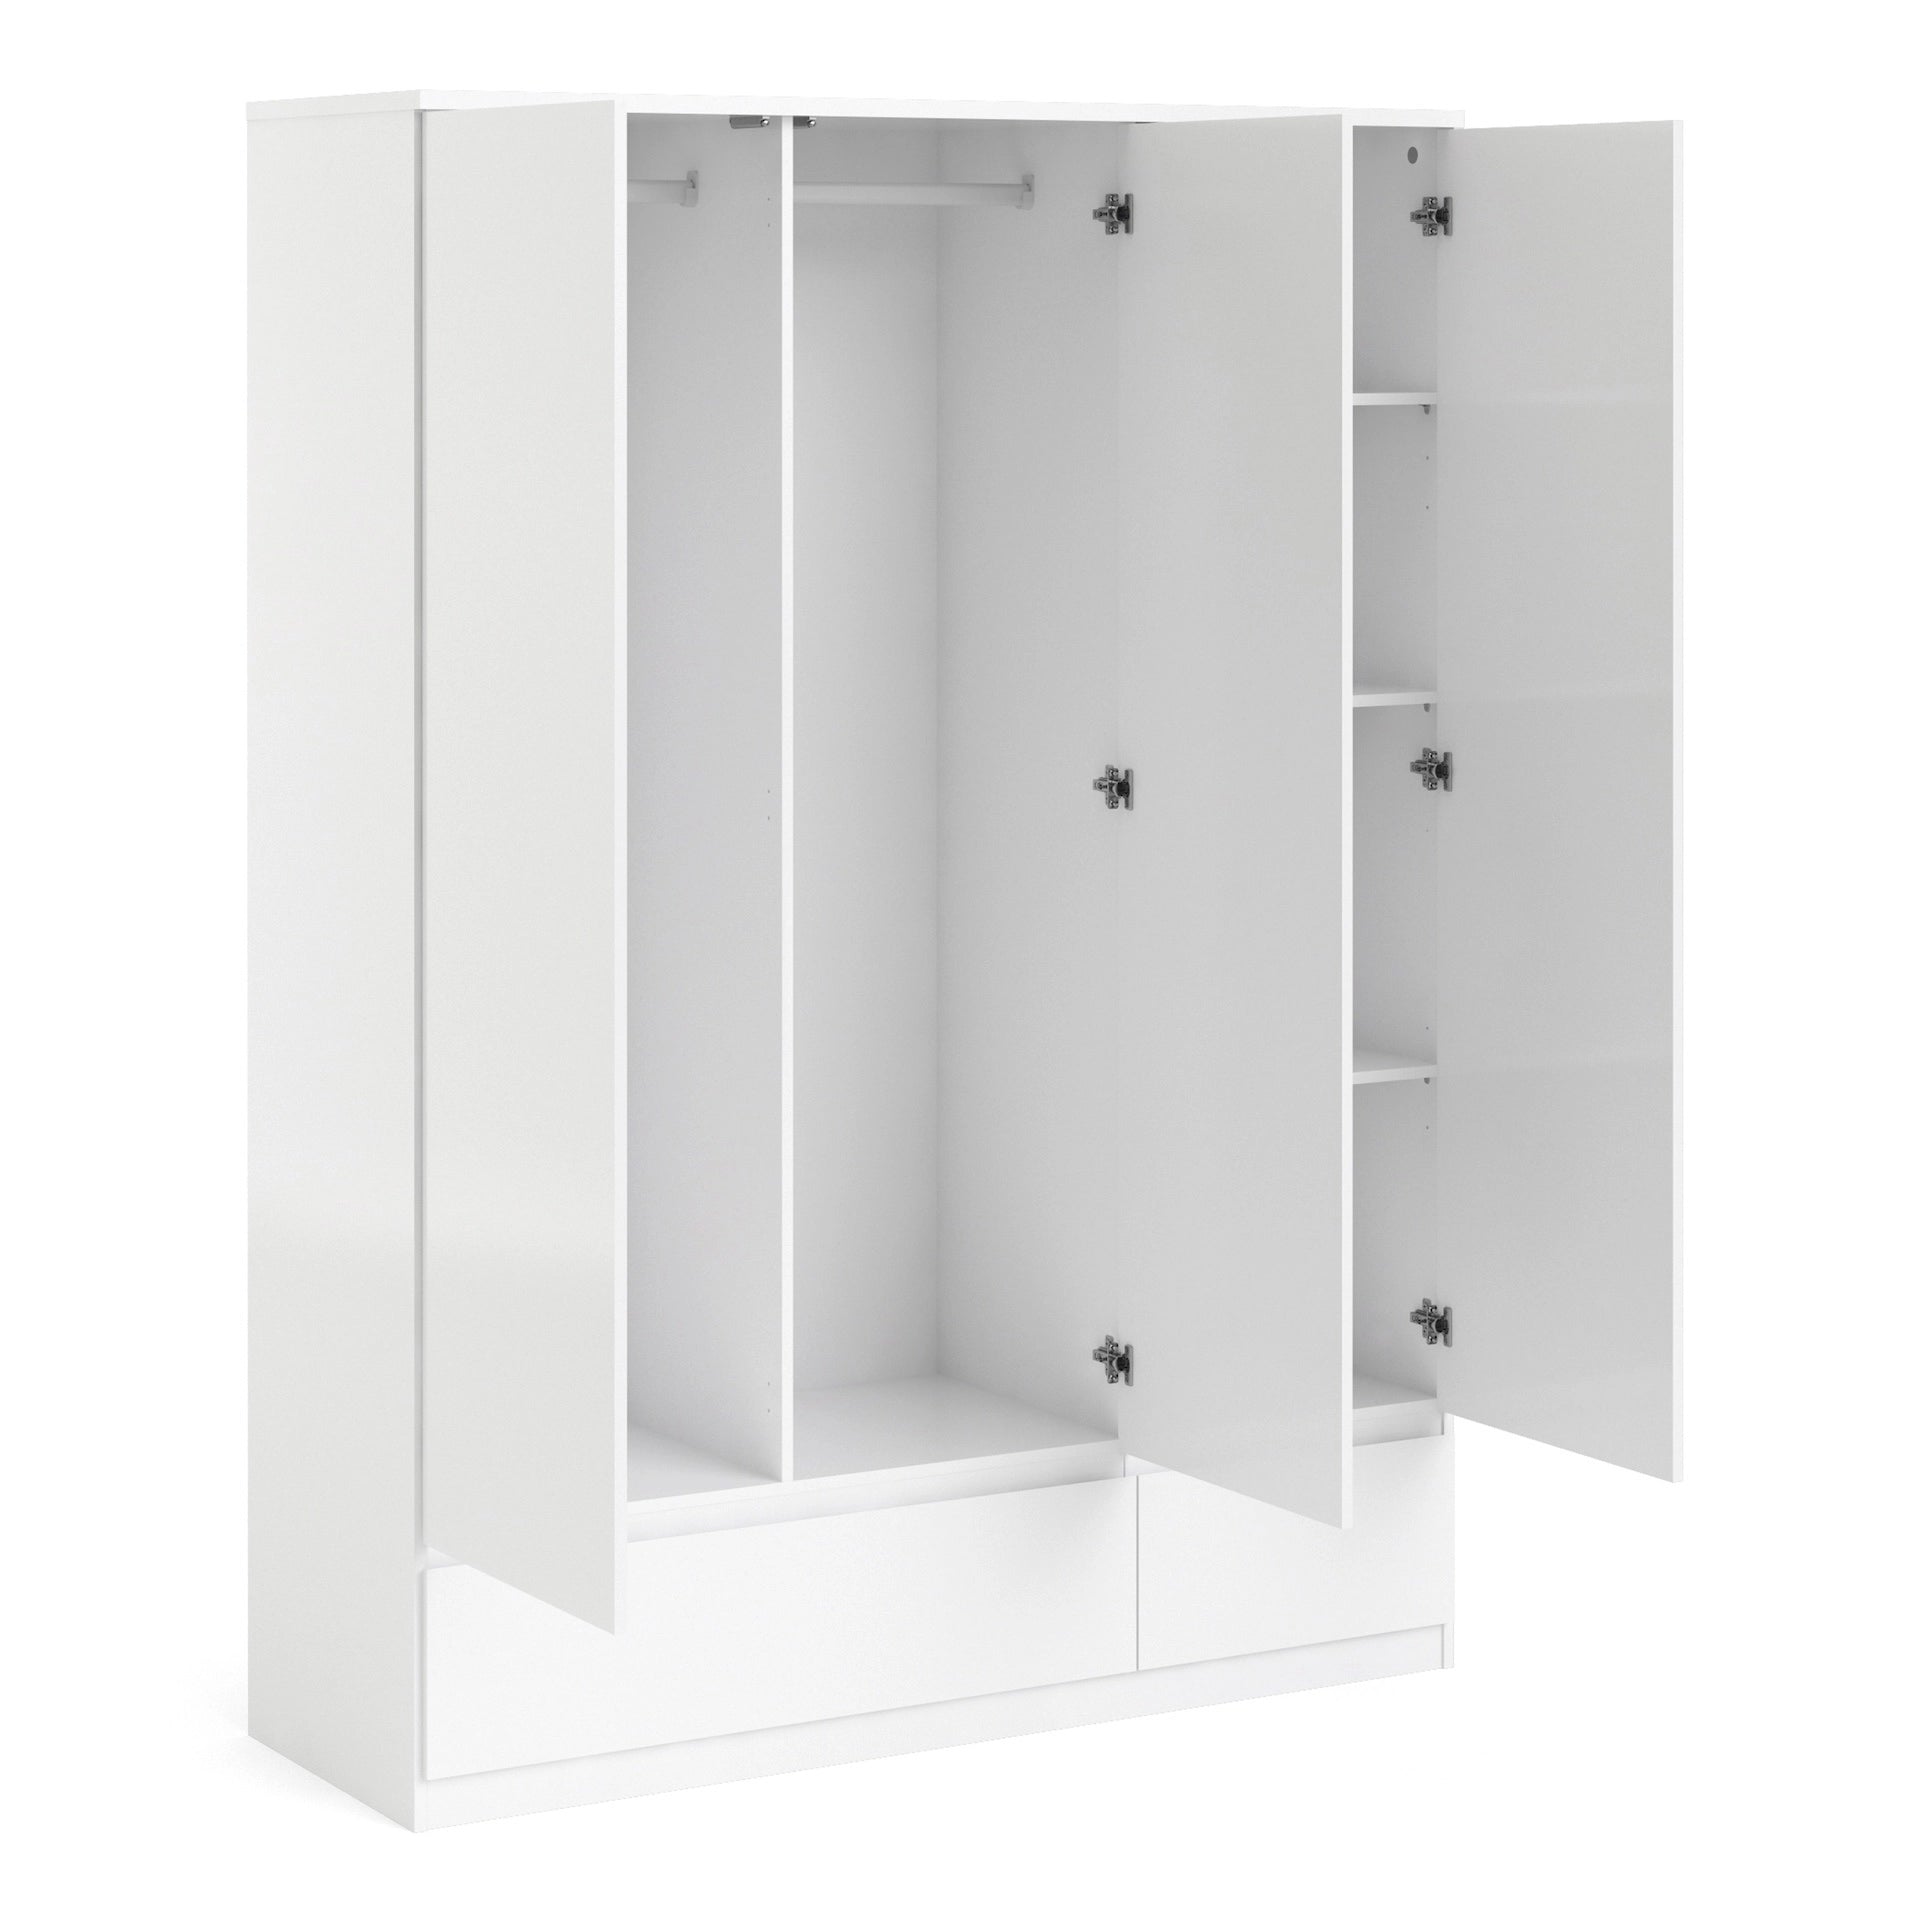 Furniture To Go Naia Wardrobe with 3 Doors + 2 Drawers in White High Gloss